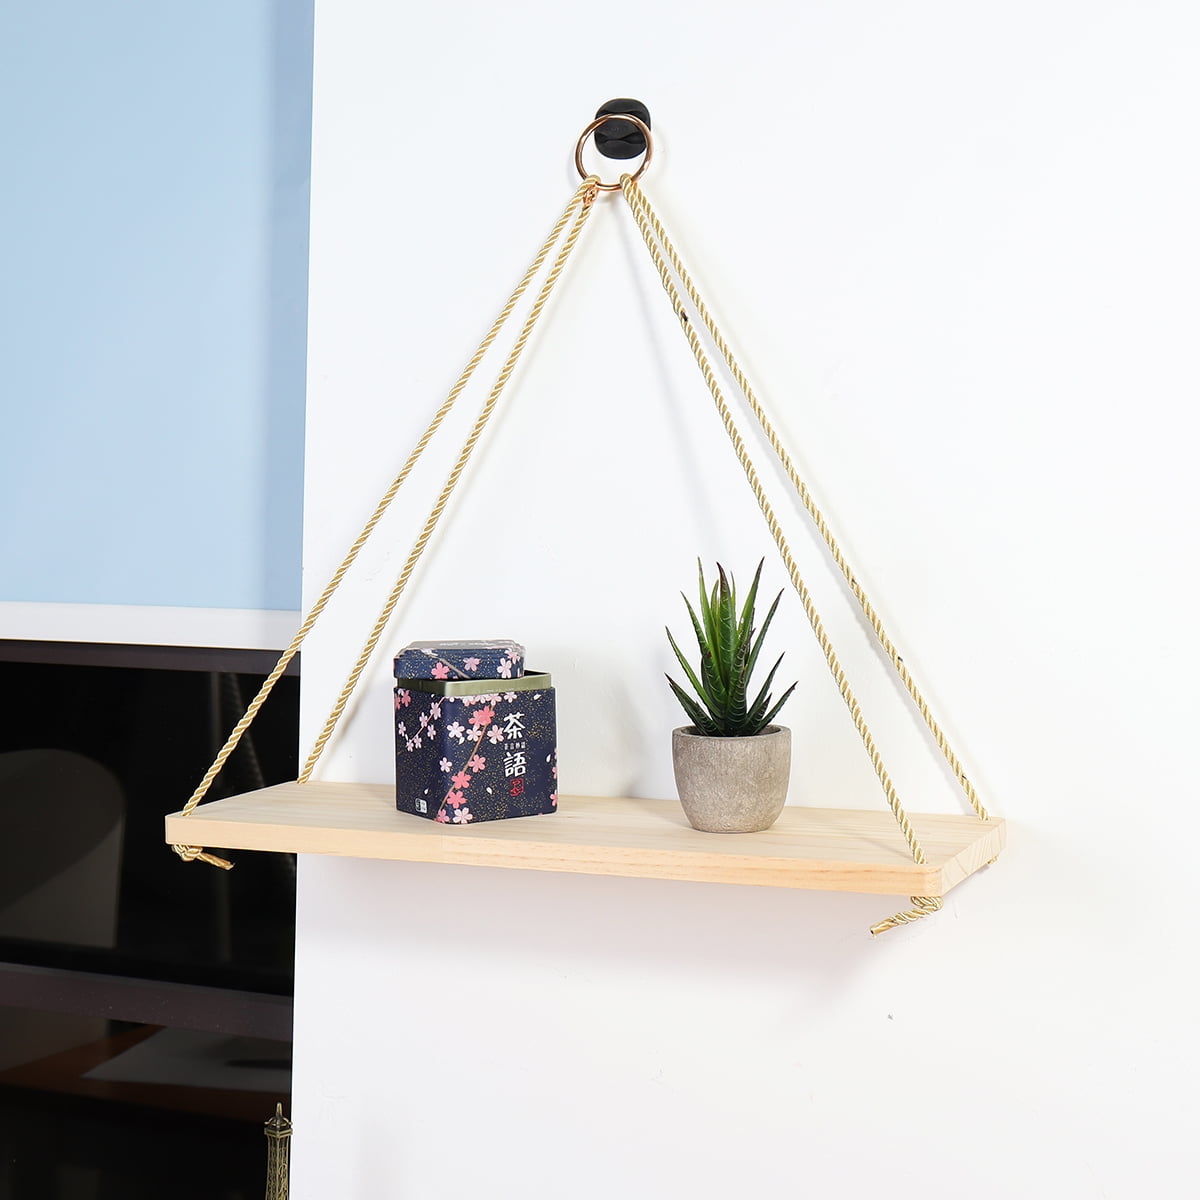 Rope Wall Mounted Floating Shelves Wood Swing Hanging Simple X2H9 